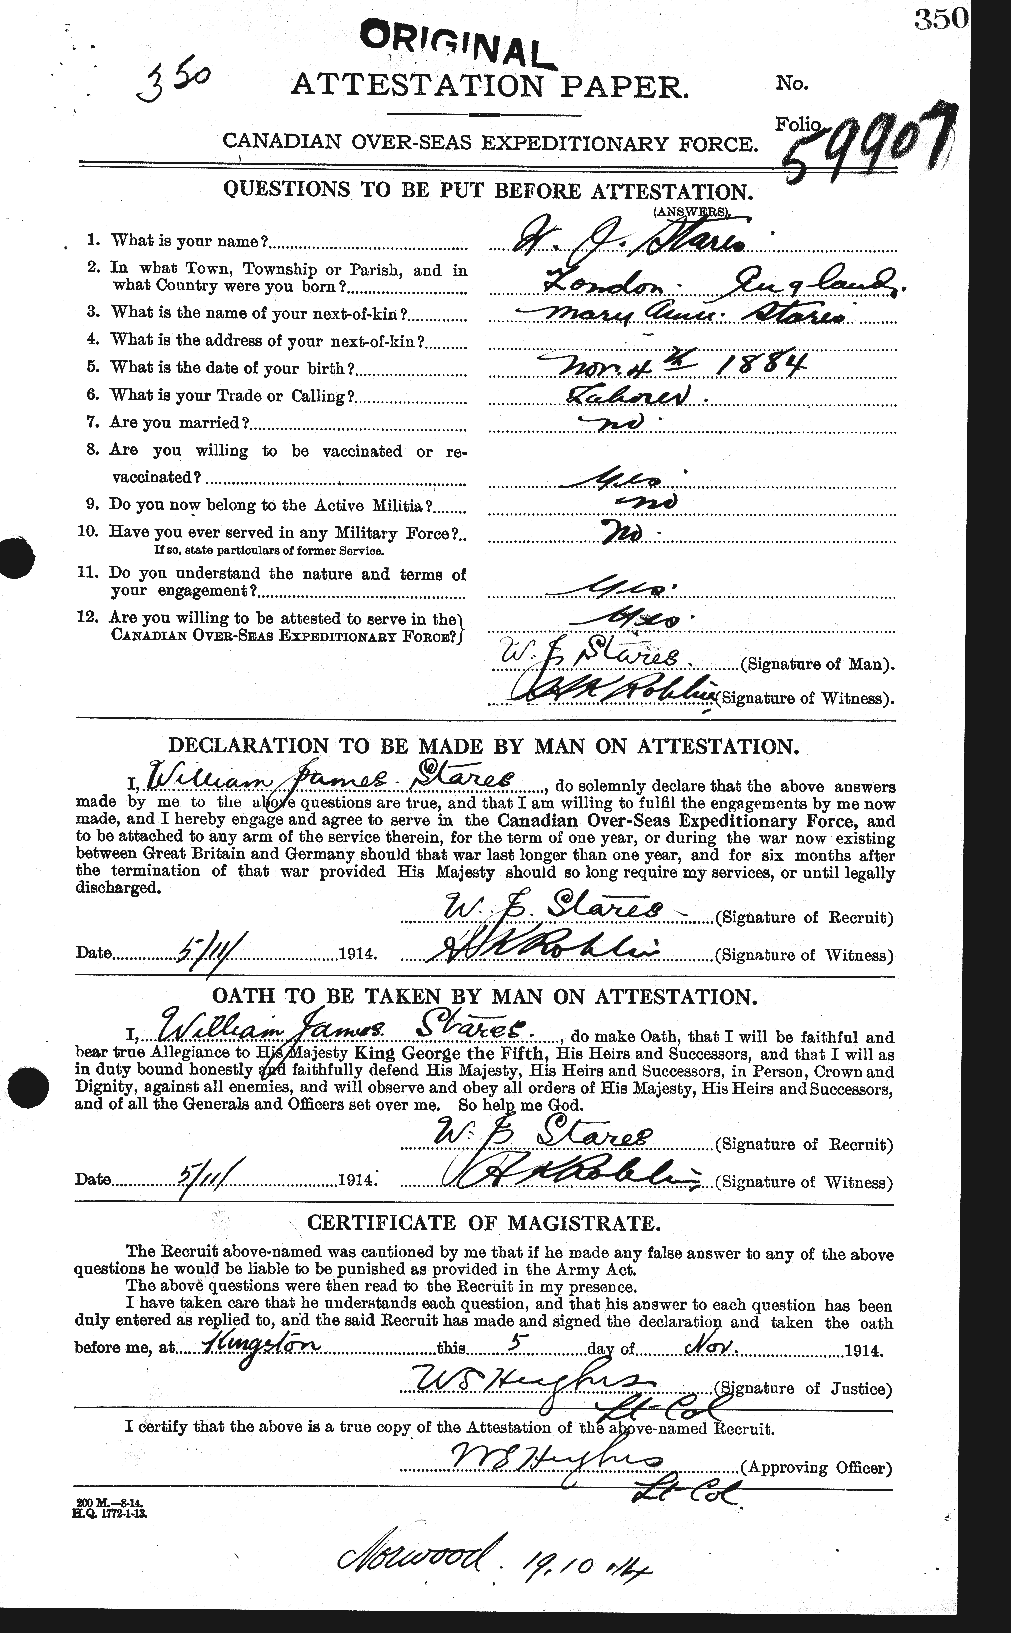 Personnel Records of the First World War - CEF 113484a